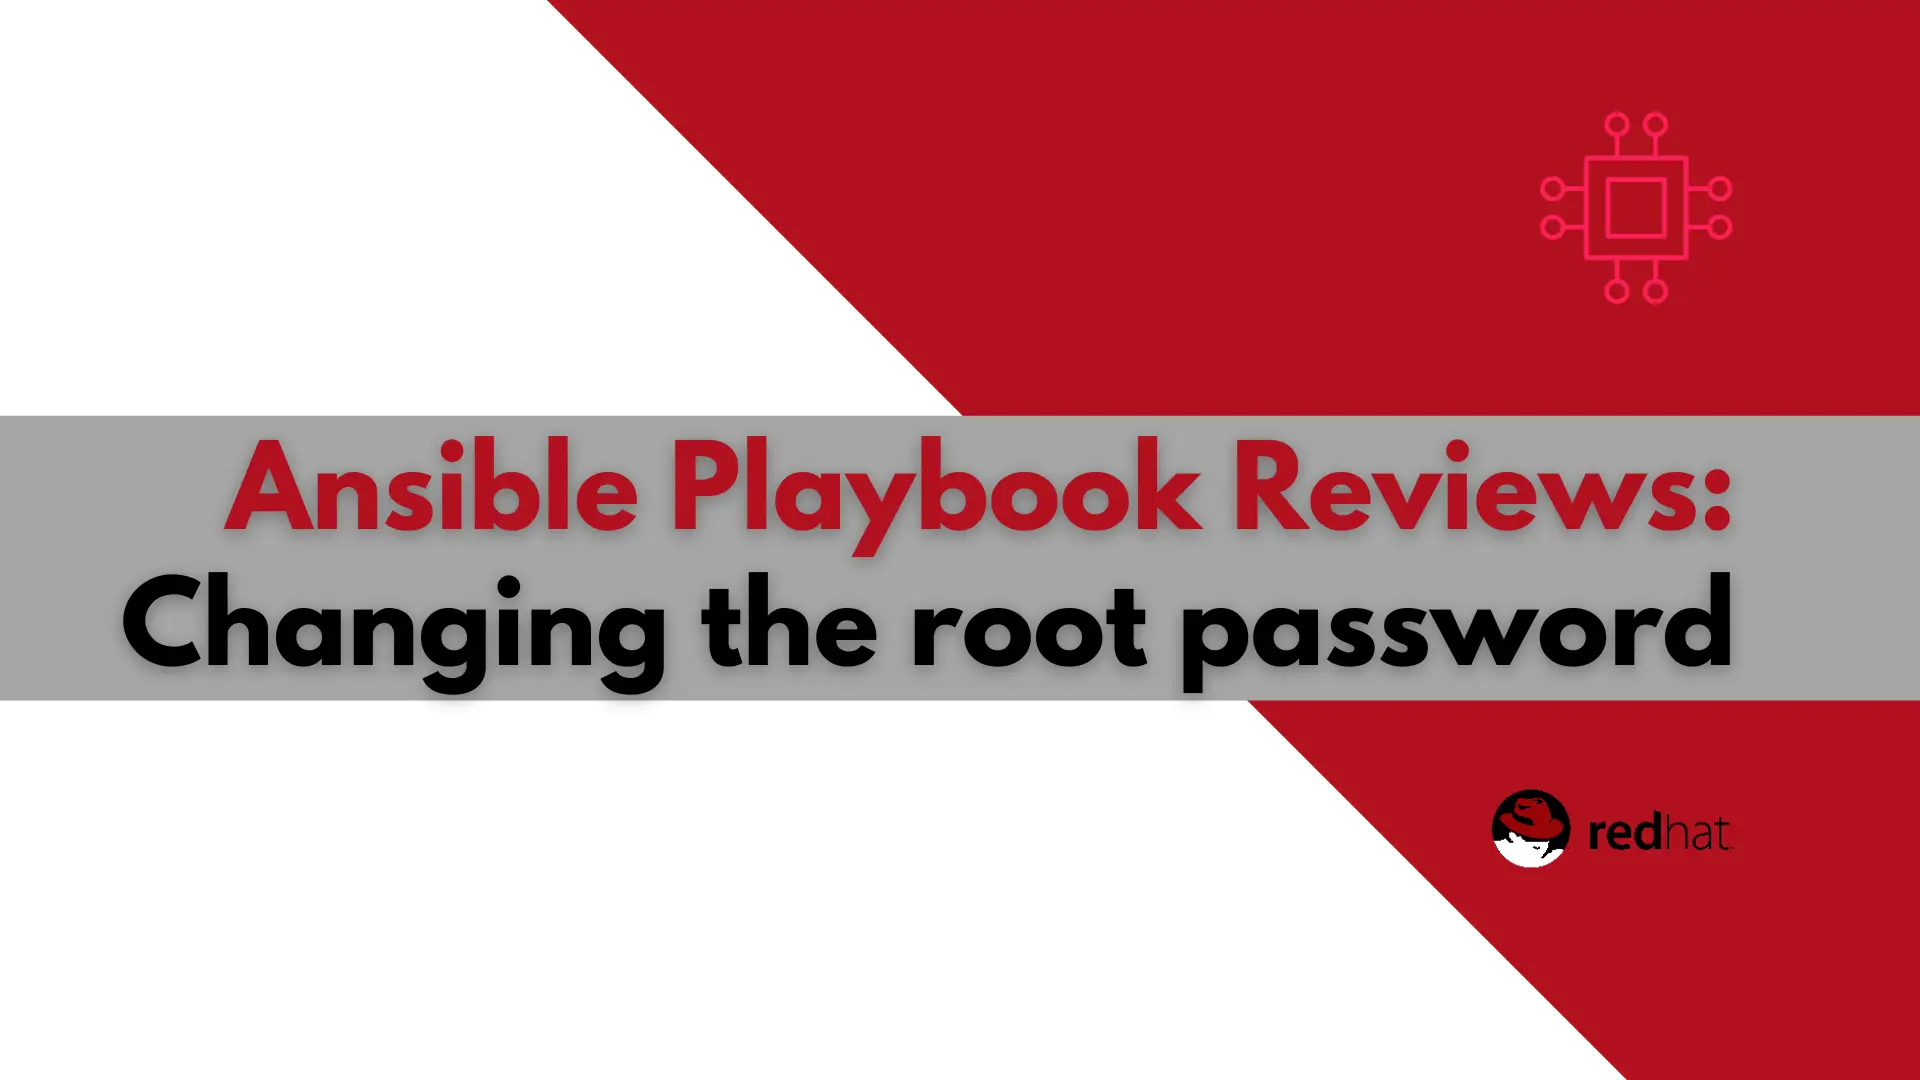 change root password using Ansible